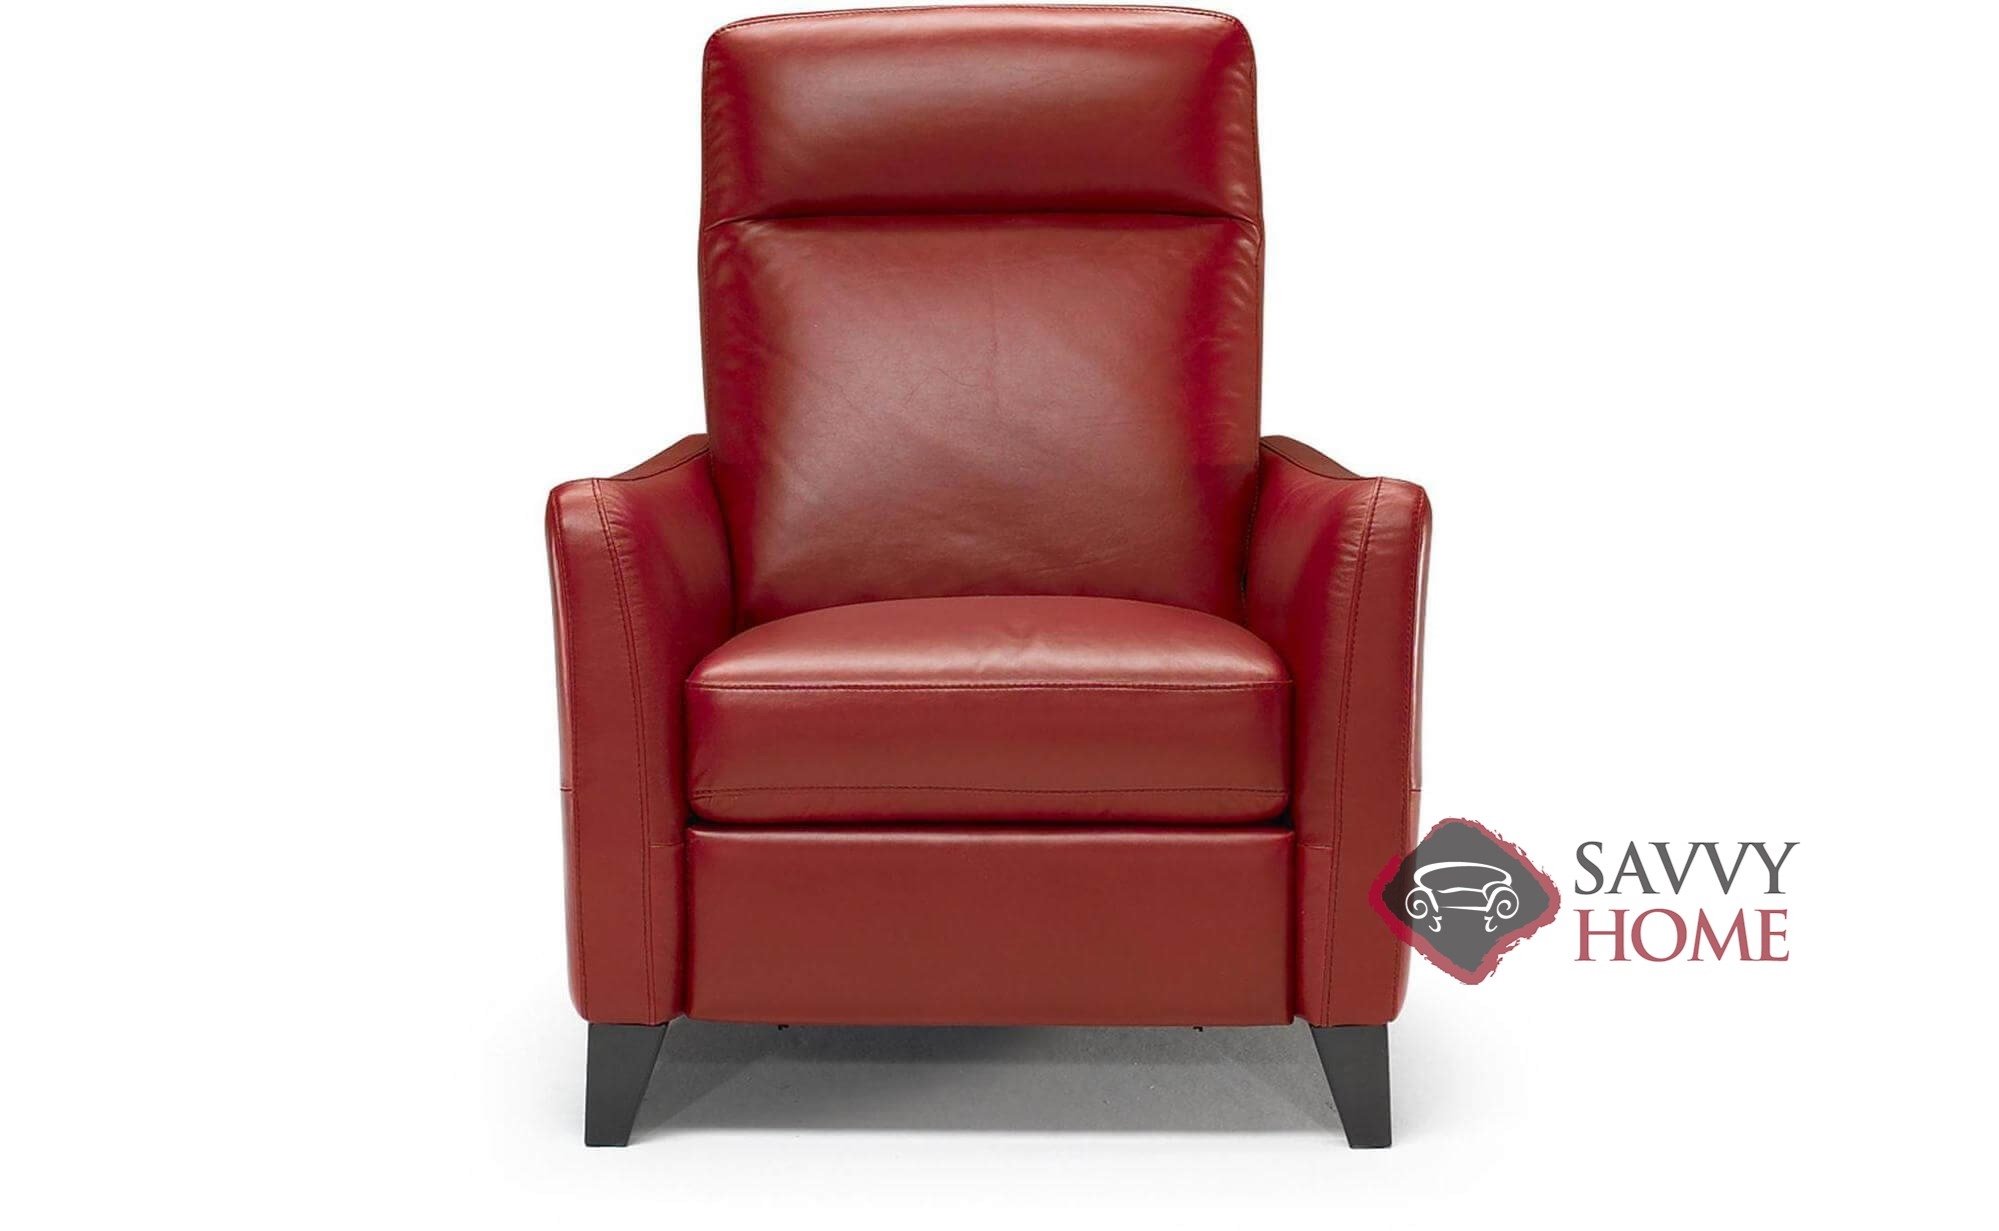 Ilaria B537 Leather Reclining Chair, Italsofa Leather Recliner